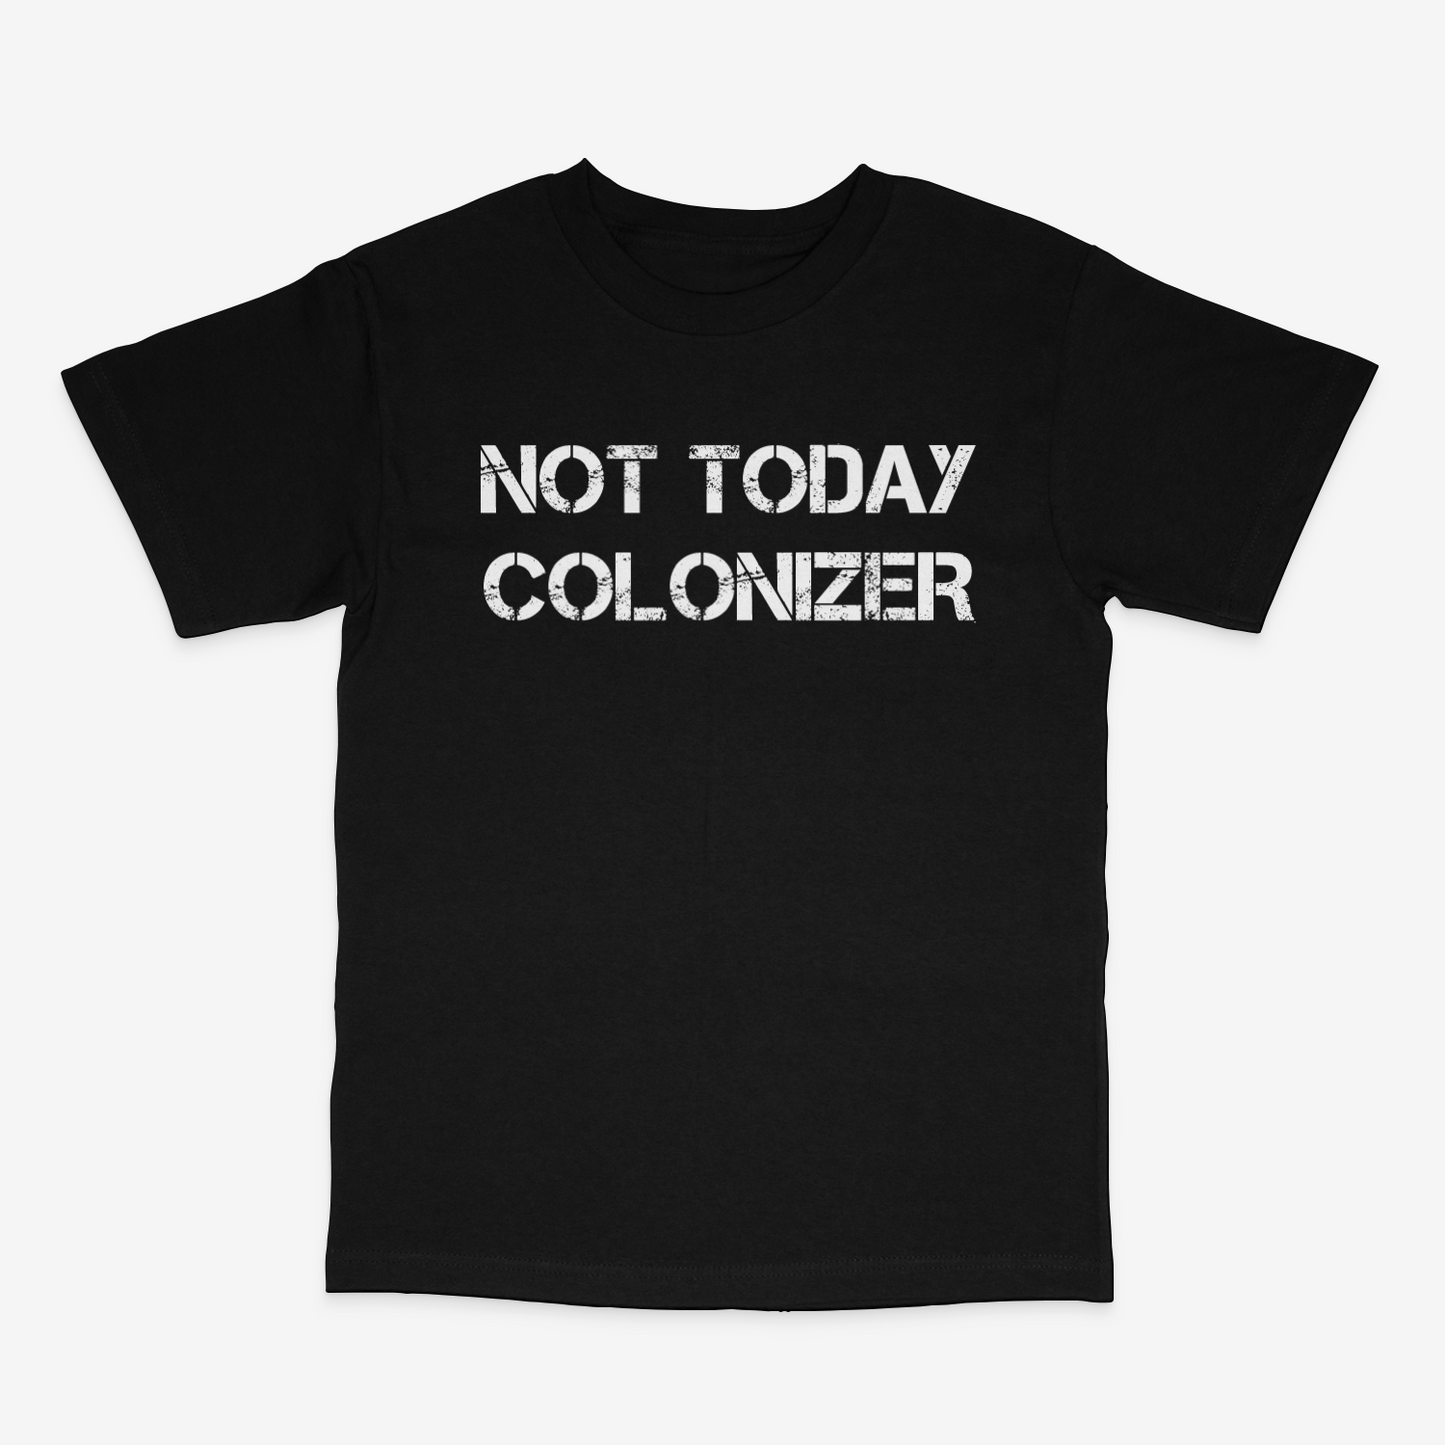 NOT TODAY COLONIZER Tee